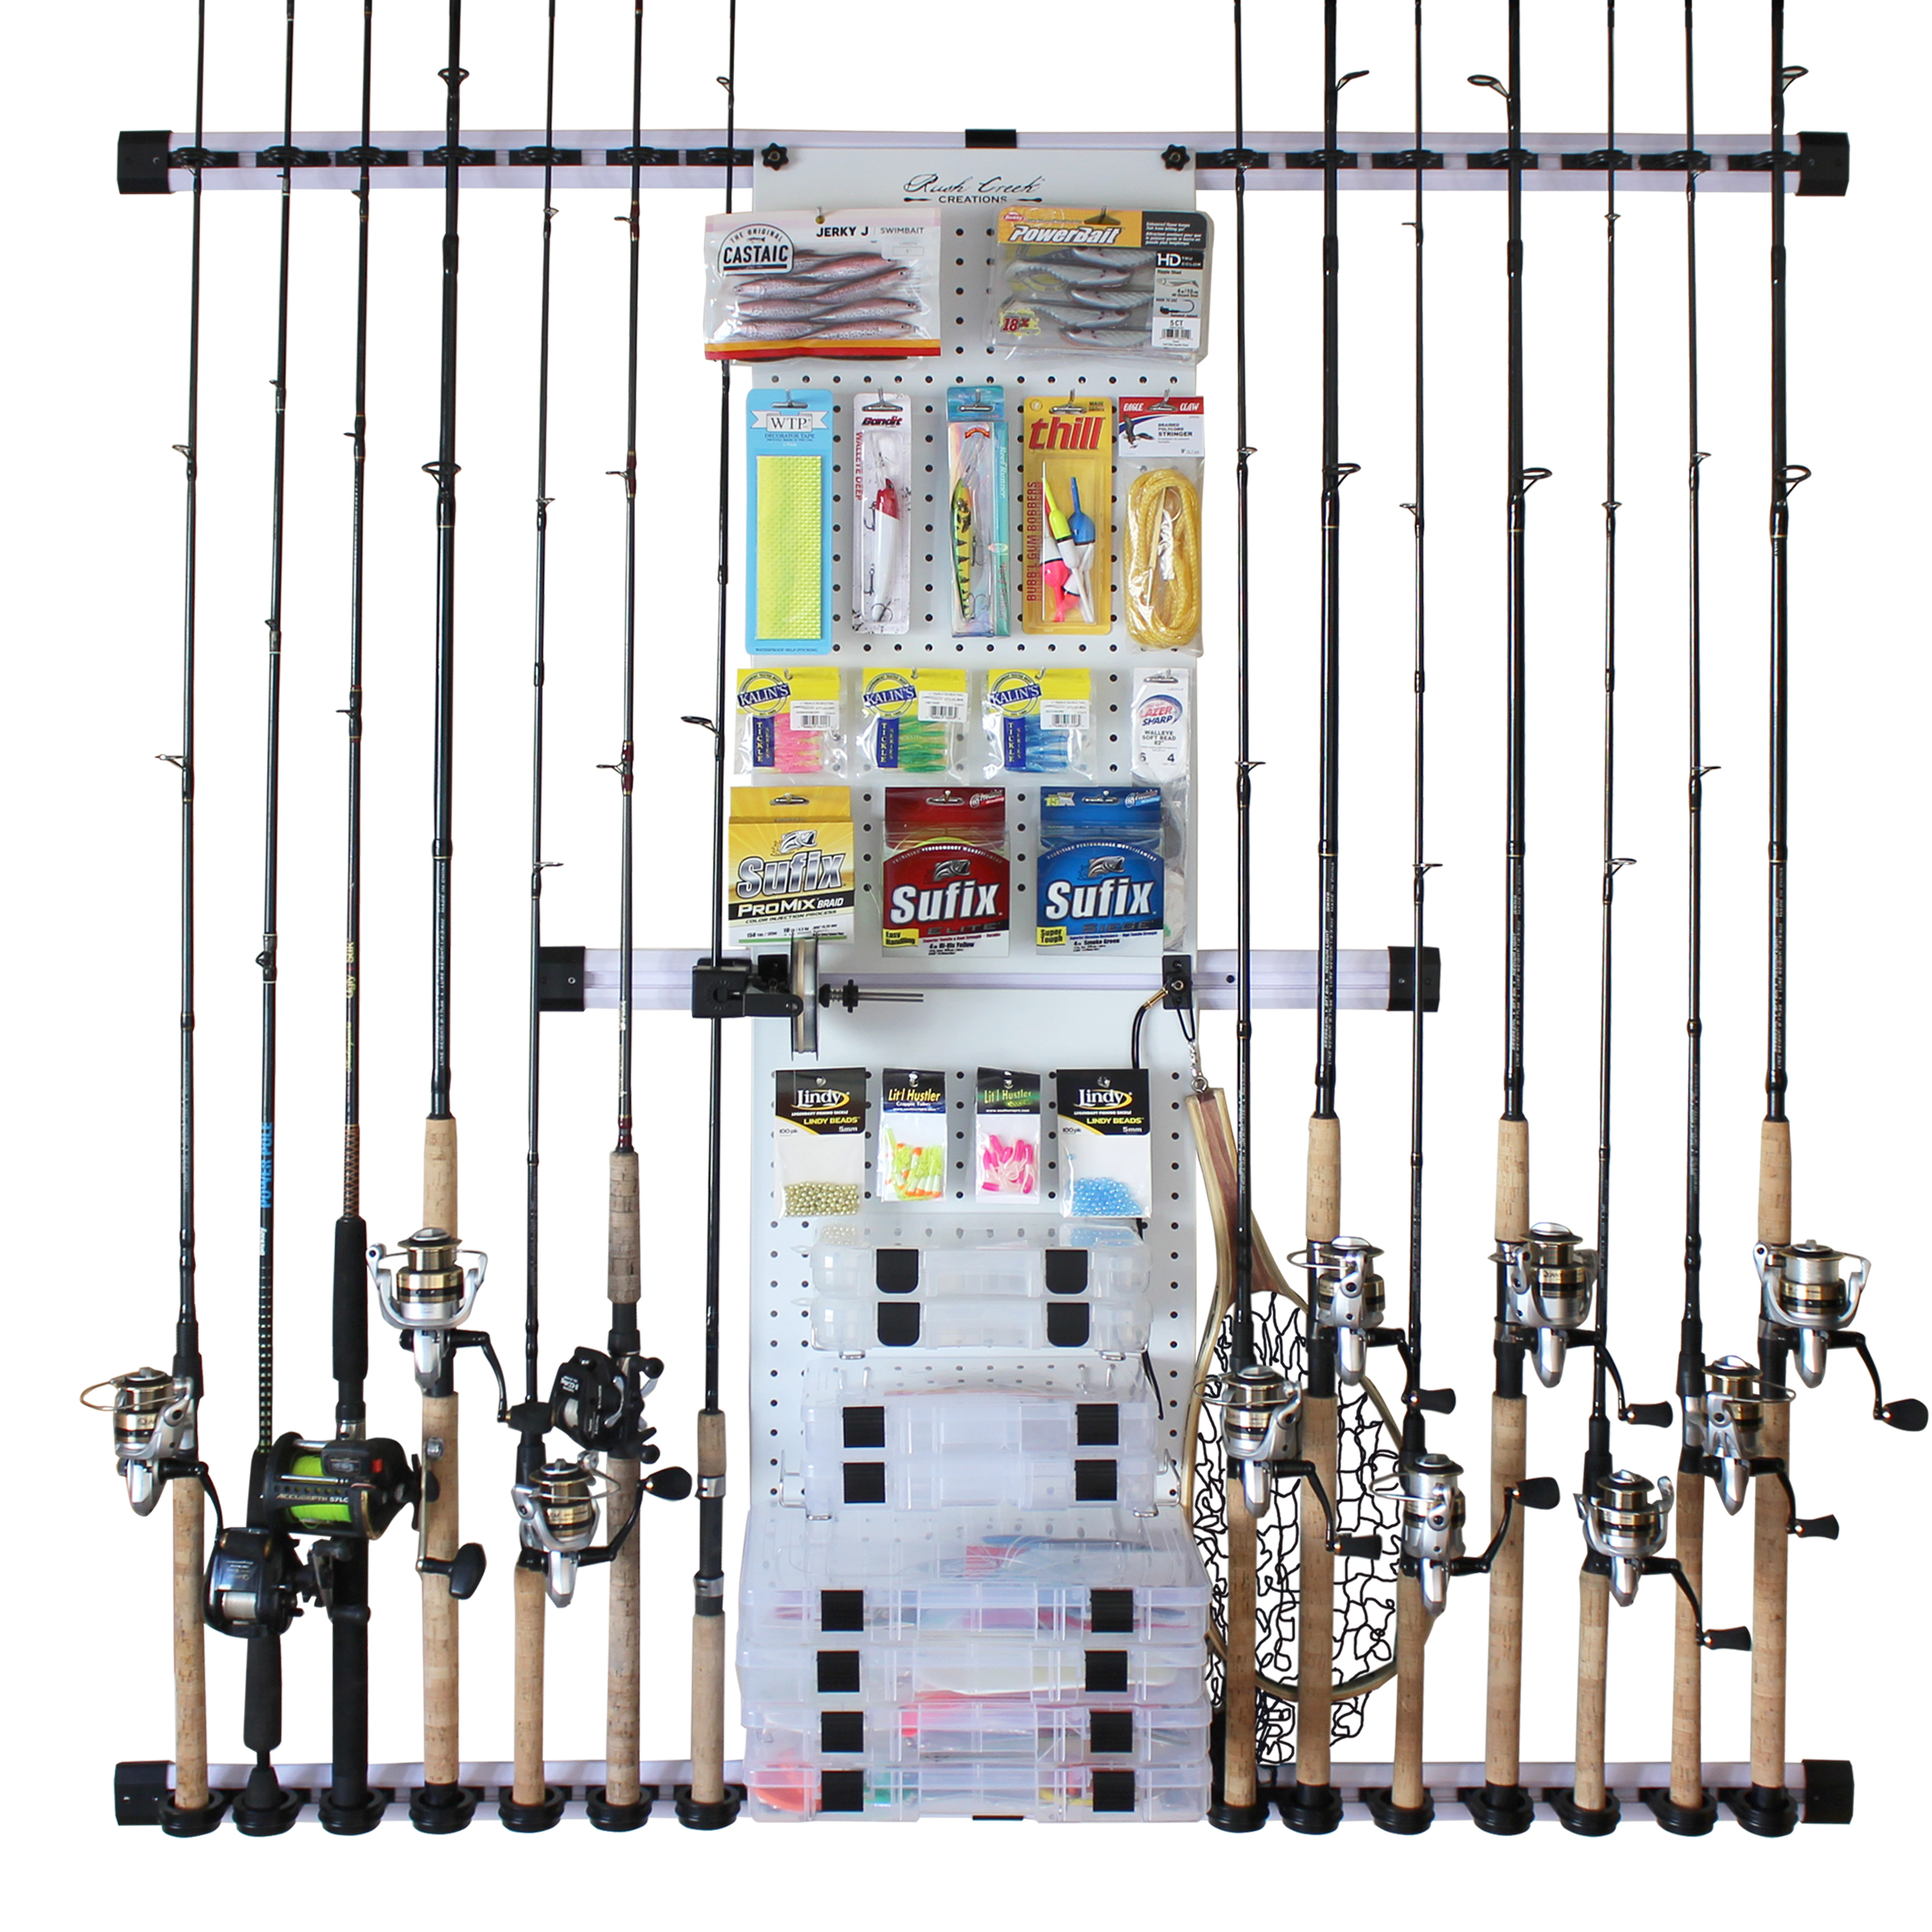 Fishing Gear -- rod holder for 10' rods?